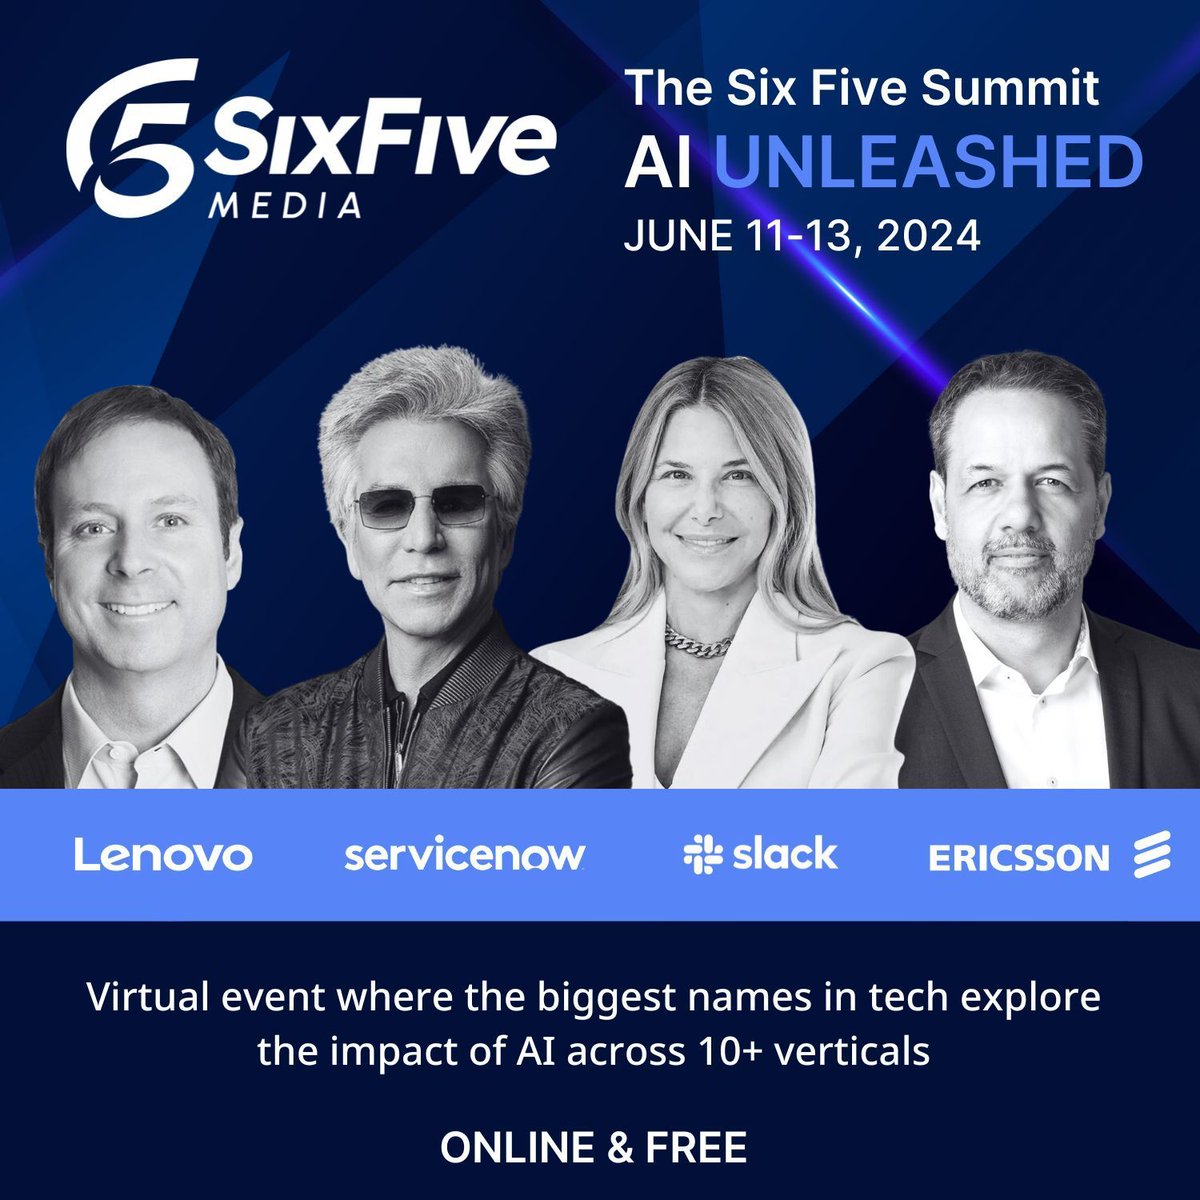 🚗 Semiconductors, automotive, sustainability - AI is driving change across sectors! Join us at #SixFiveSummit24 to discover how industry leaders like @Samsung, @Qualcomm, @Lenovo, and others are harnessing AI to shape the future. Save your spot: buff.ly/3VnWYIL